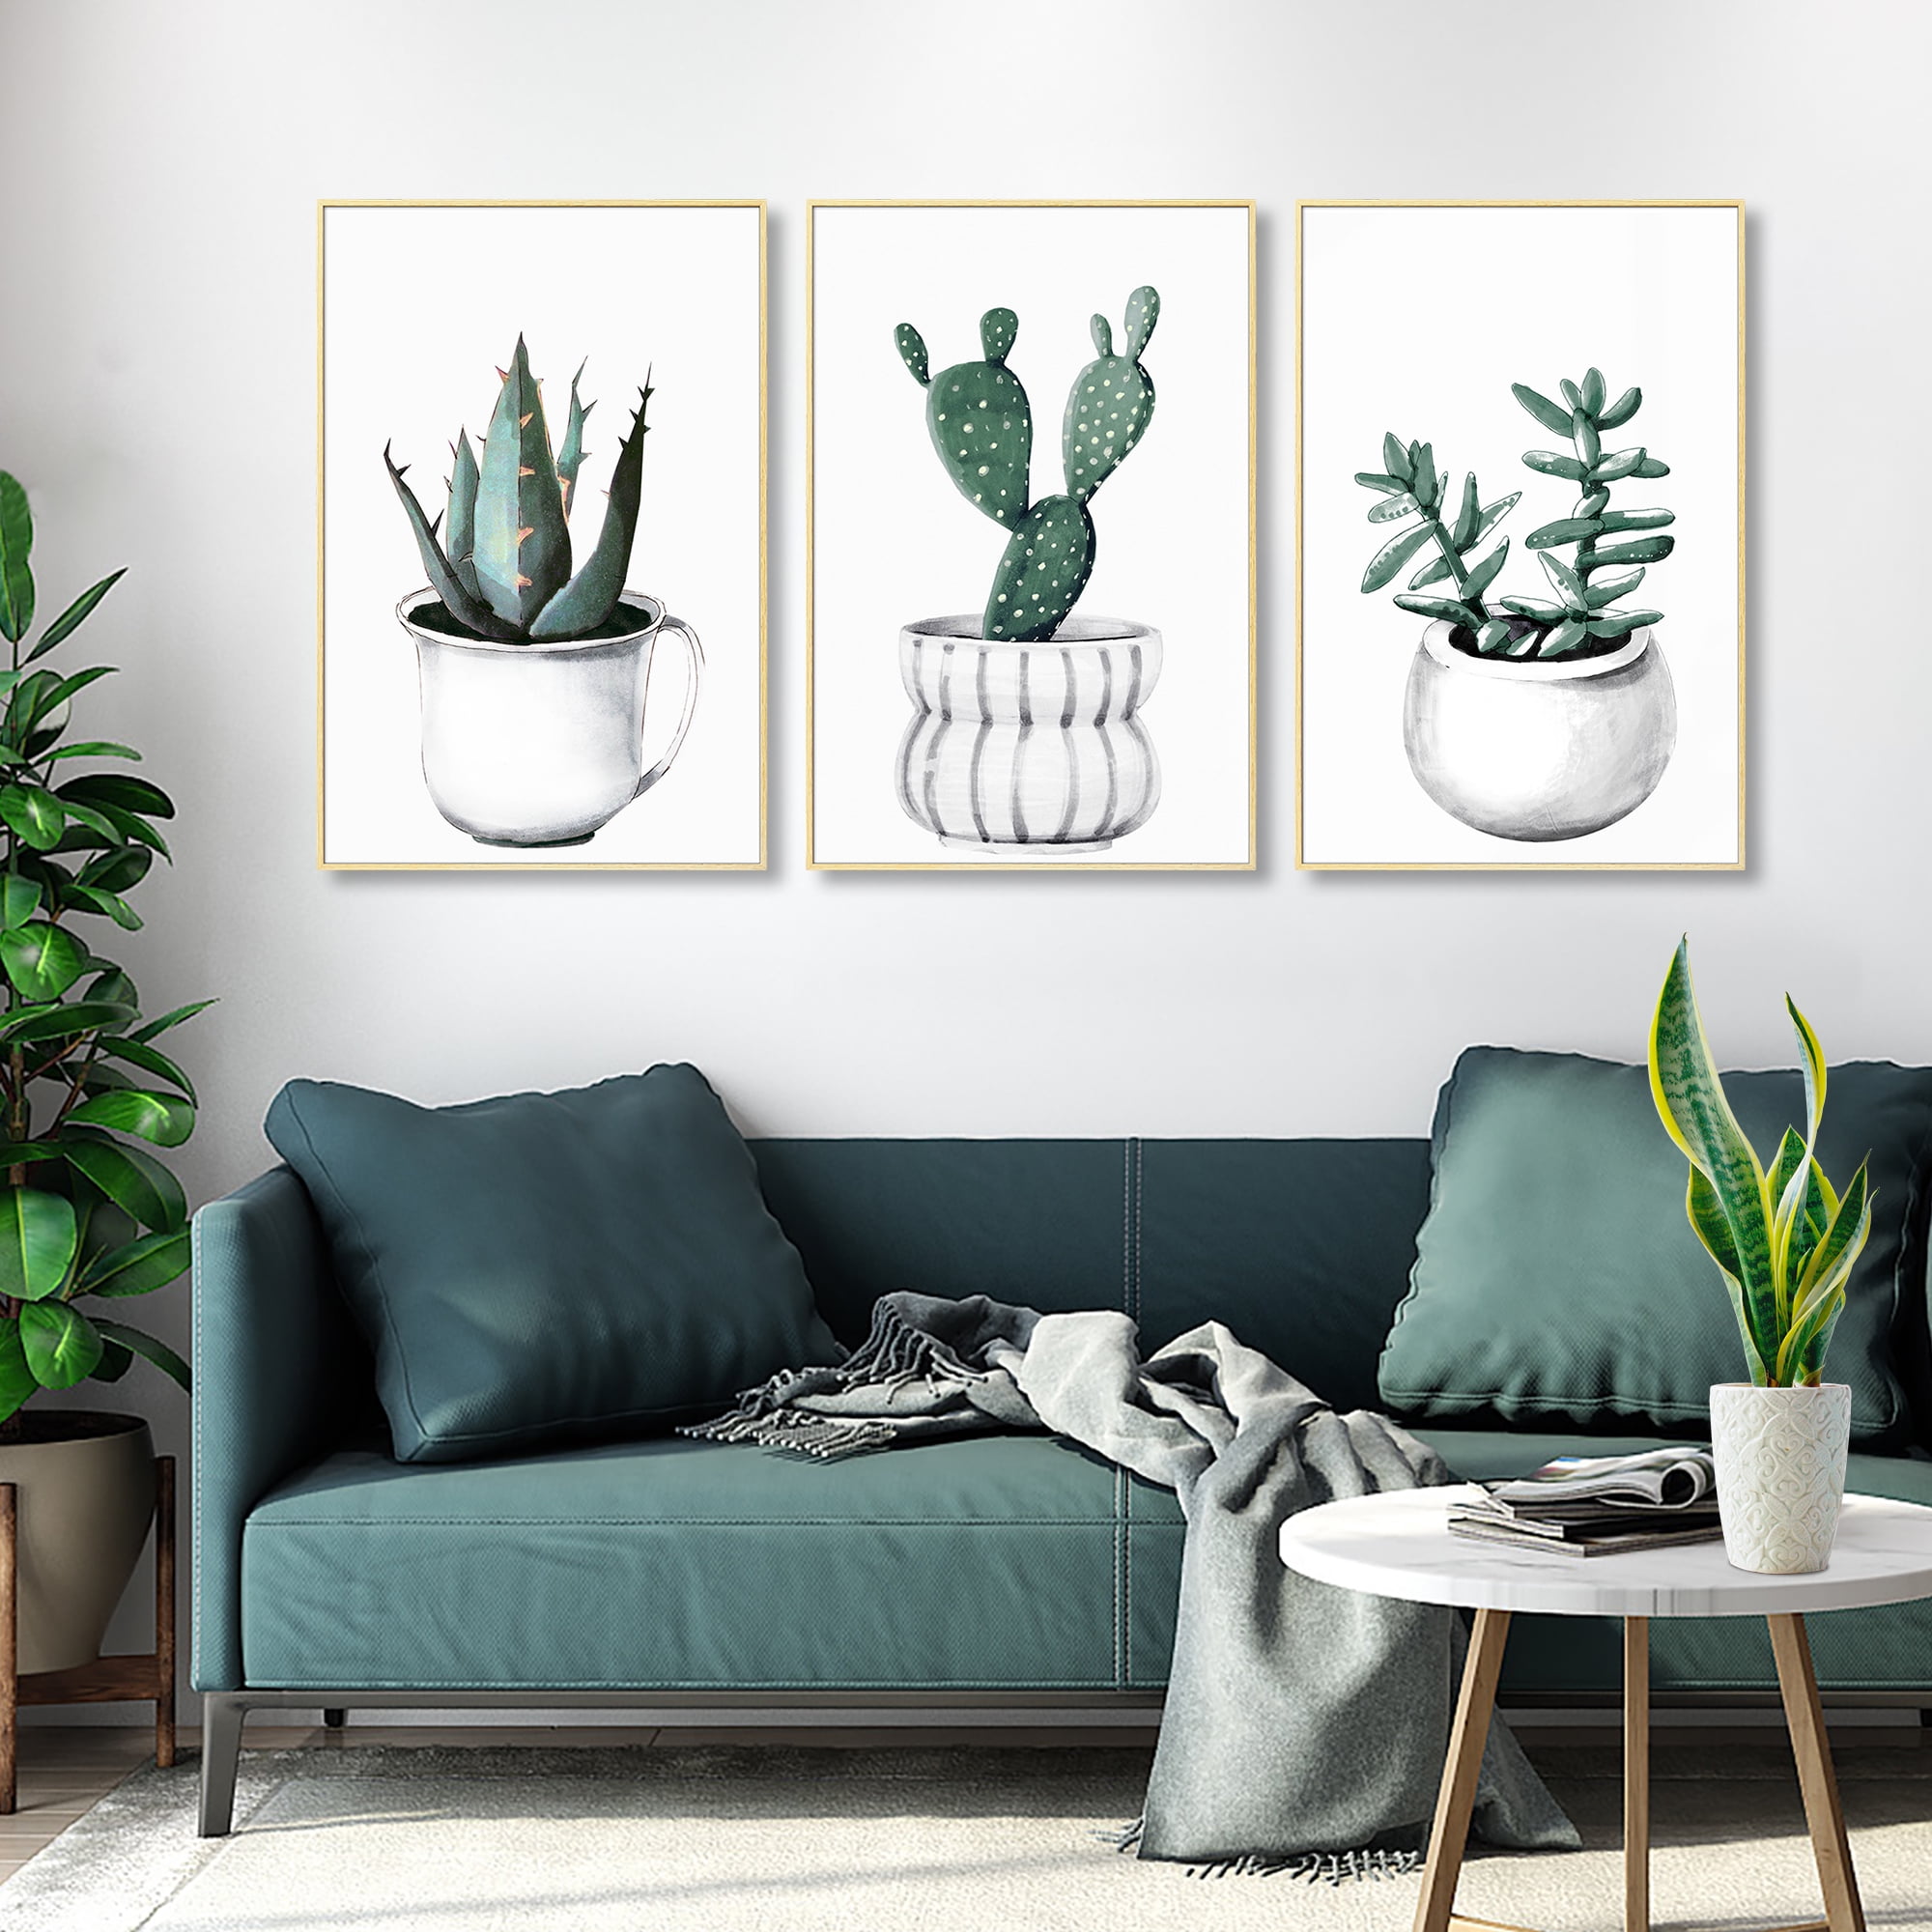 Canvas Wall Art For Living Room Bathroom Wall Decor For Bedroom Kitchen Artwork Canvas Prints Green Succulent Cactus Painting 16" X 24" Pieces Moder - 3